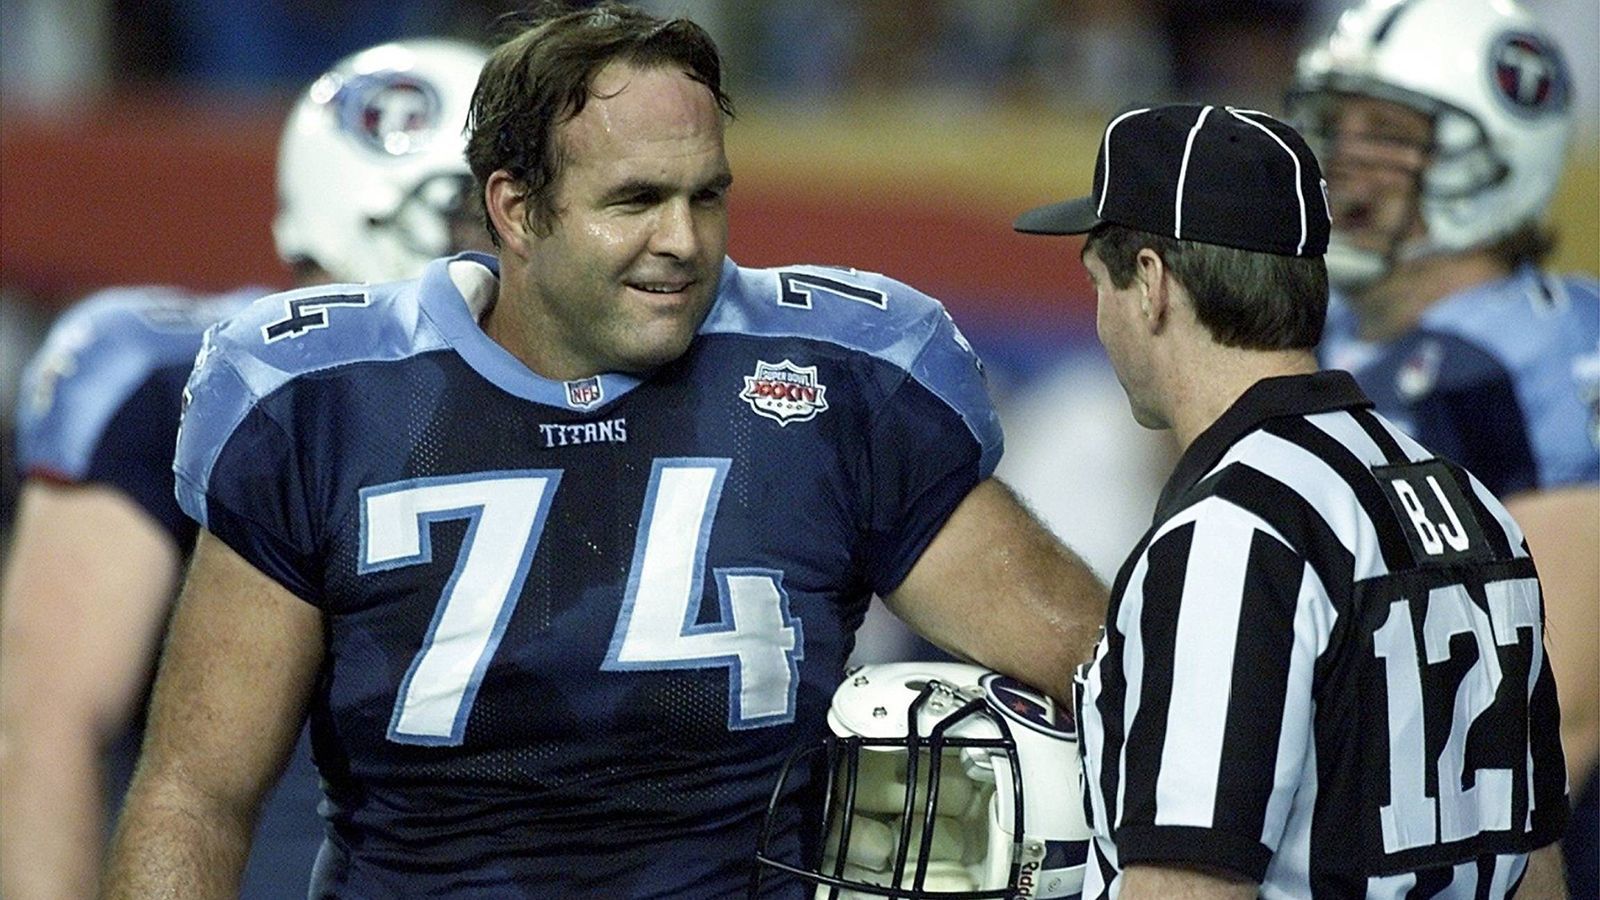 
                <strong>Tennessee Titans</strong><br>
                &#x2022; Bruce Matthews<br>&#x2022; Offensive Lineman und Long Snapper<br>&#x2022; Spiele:<strong> 296</strong><br>
              